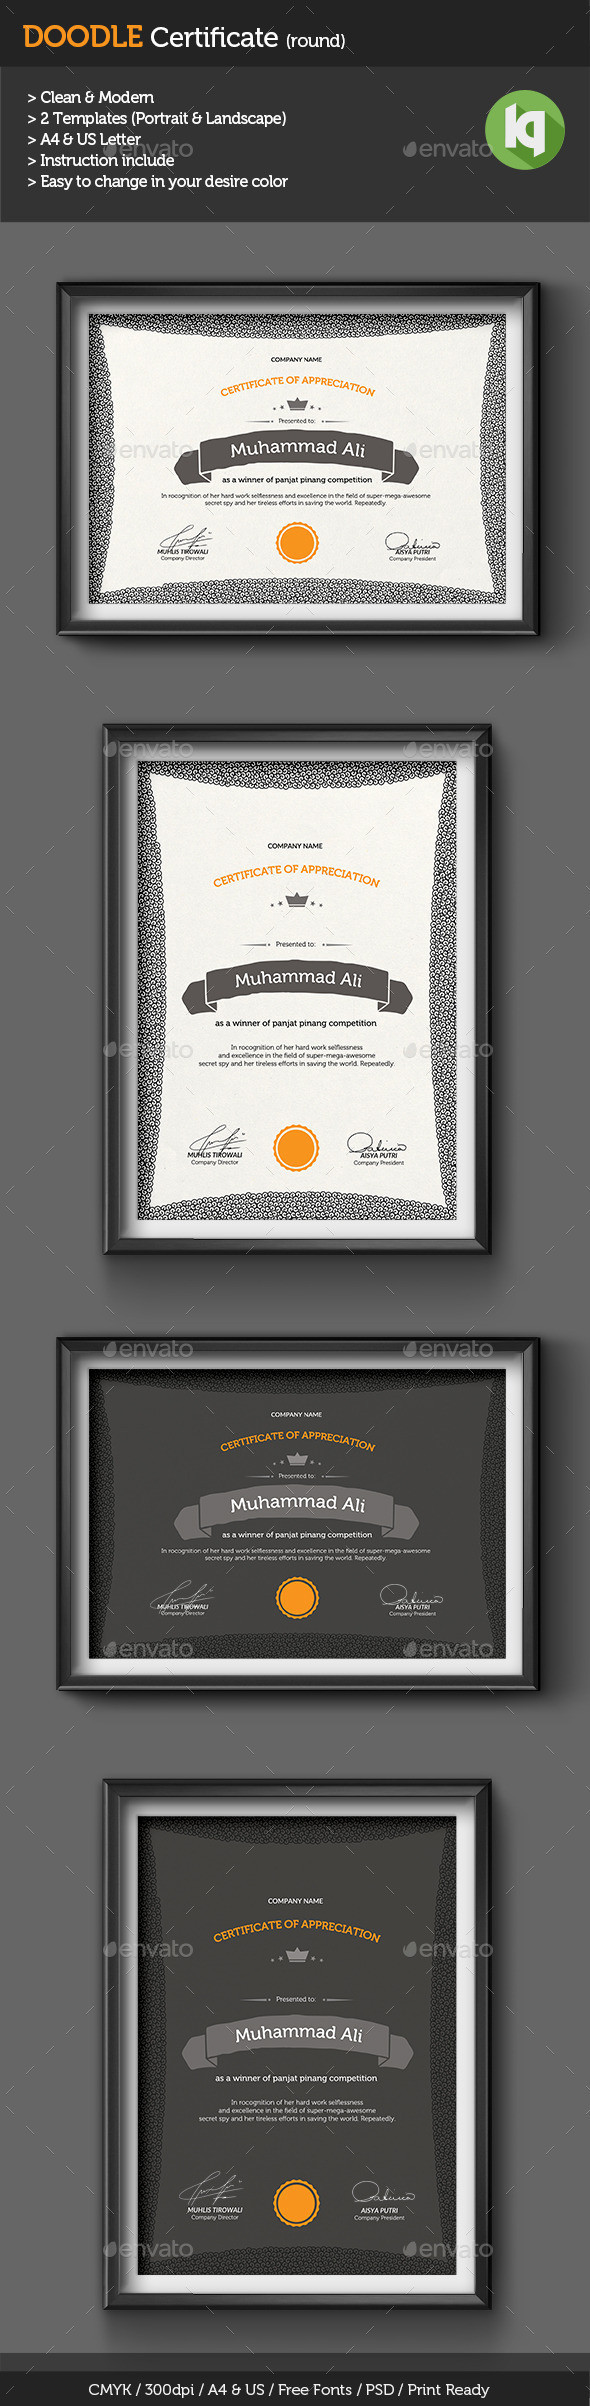 Doodle certificate preview